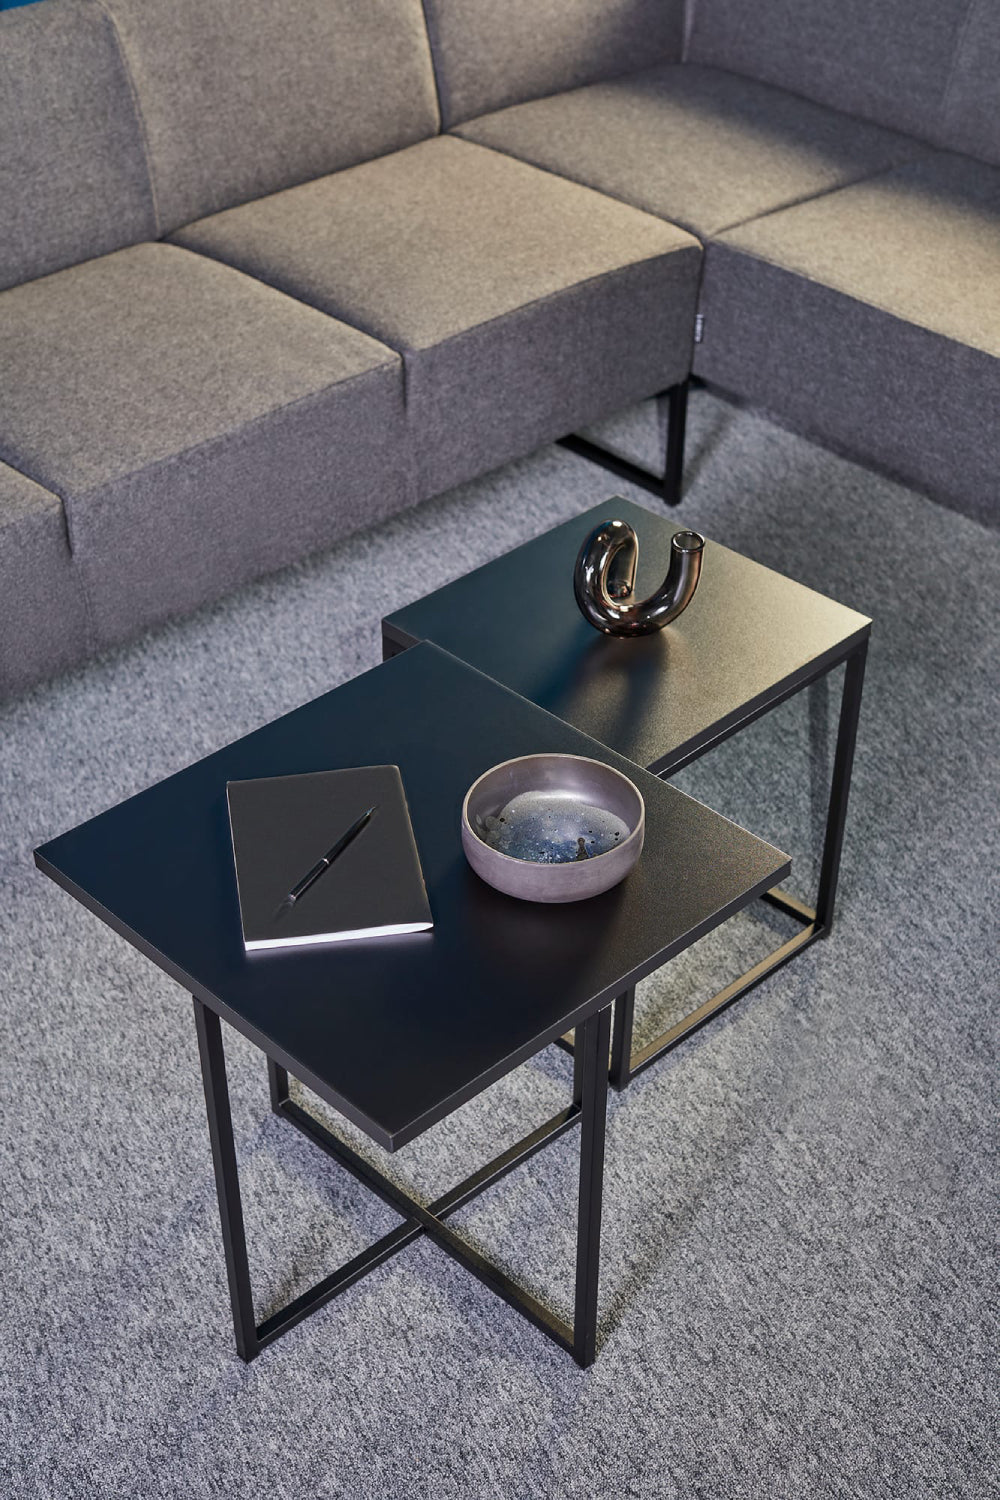 Verso-Upholstered-Modular-Sofa-in-Grey-Finish-with-Black-Coffee-Table-in-Living-Room-Setting